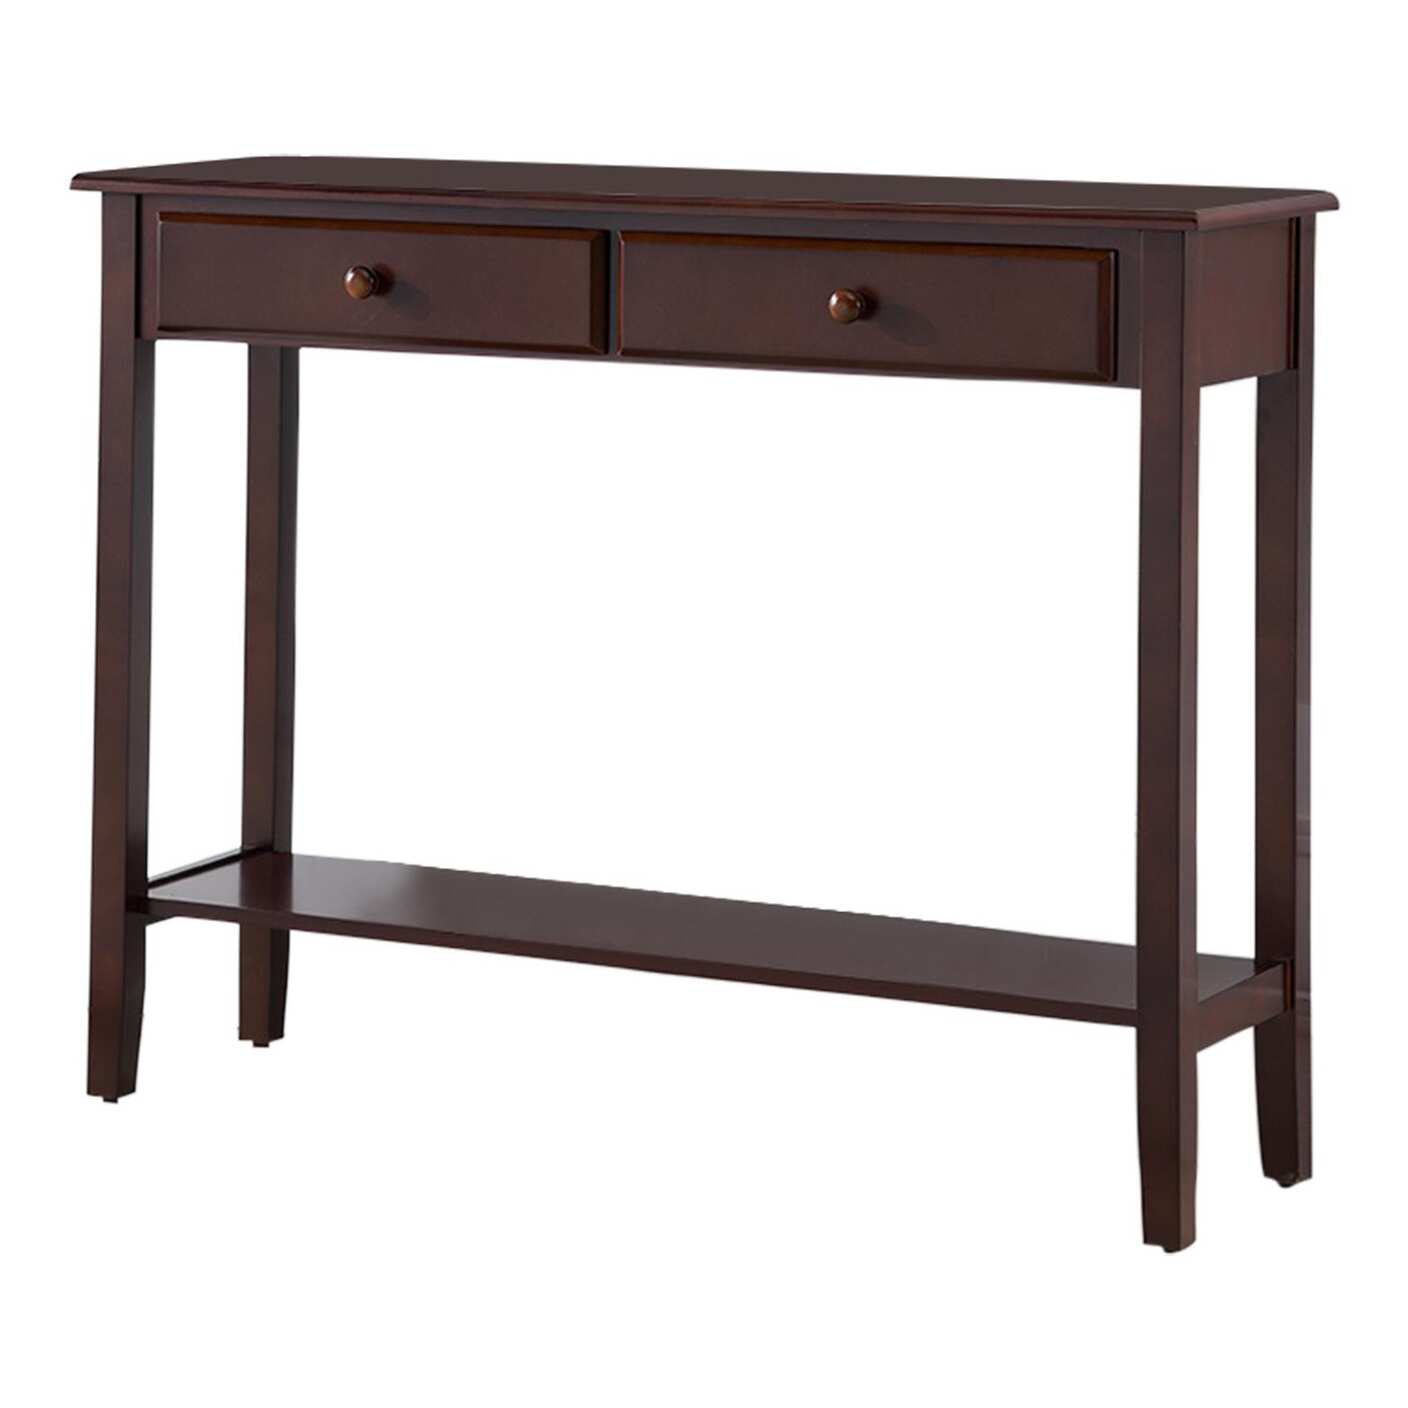 Wood Console Table with 2 Drawers